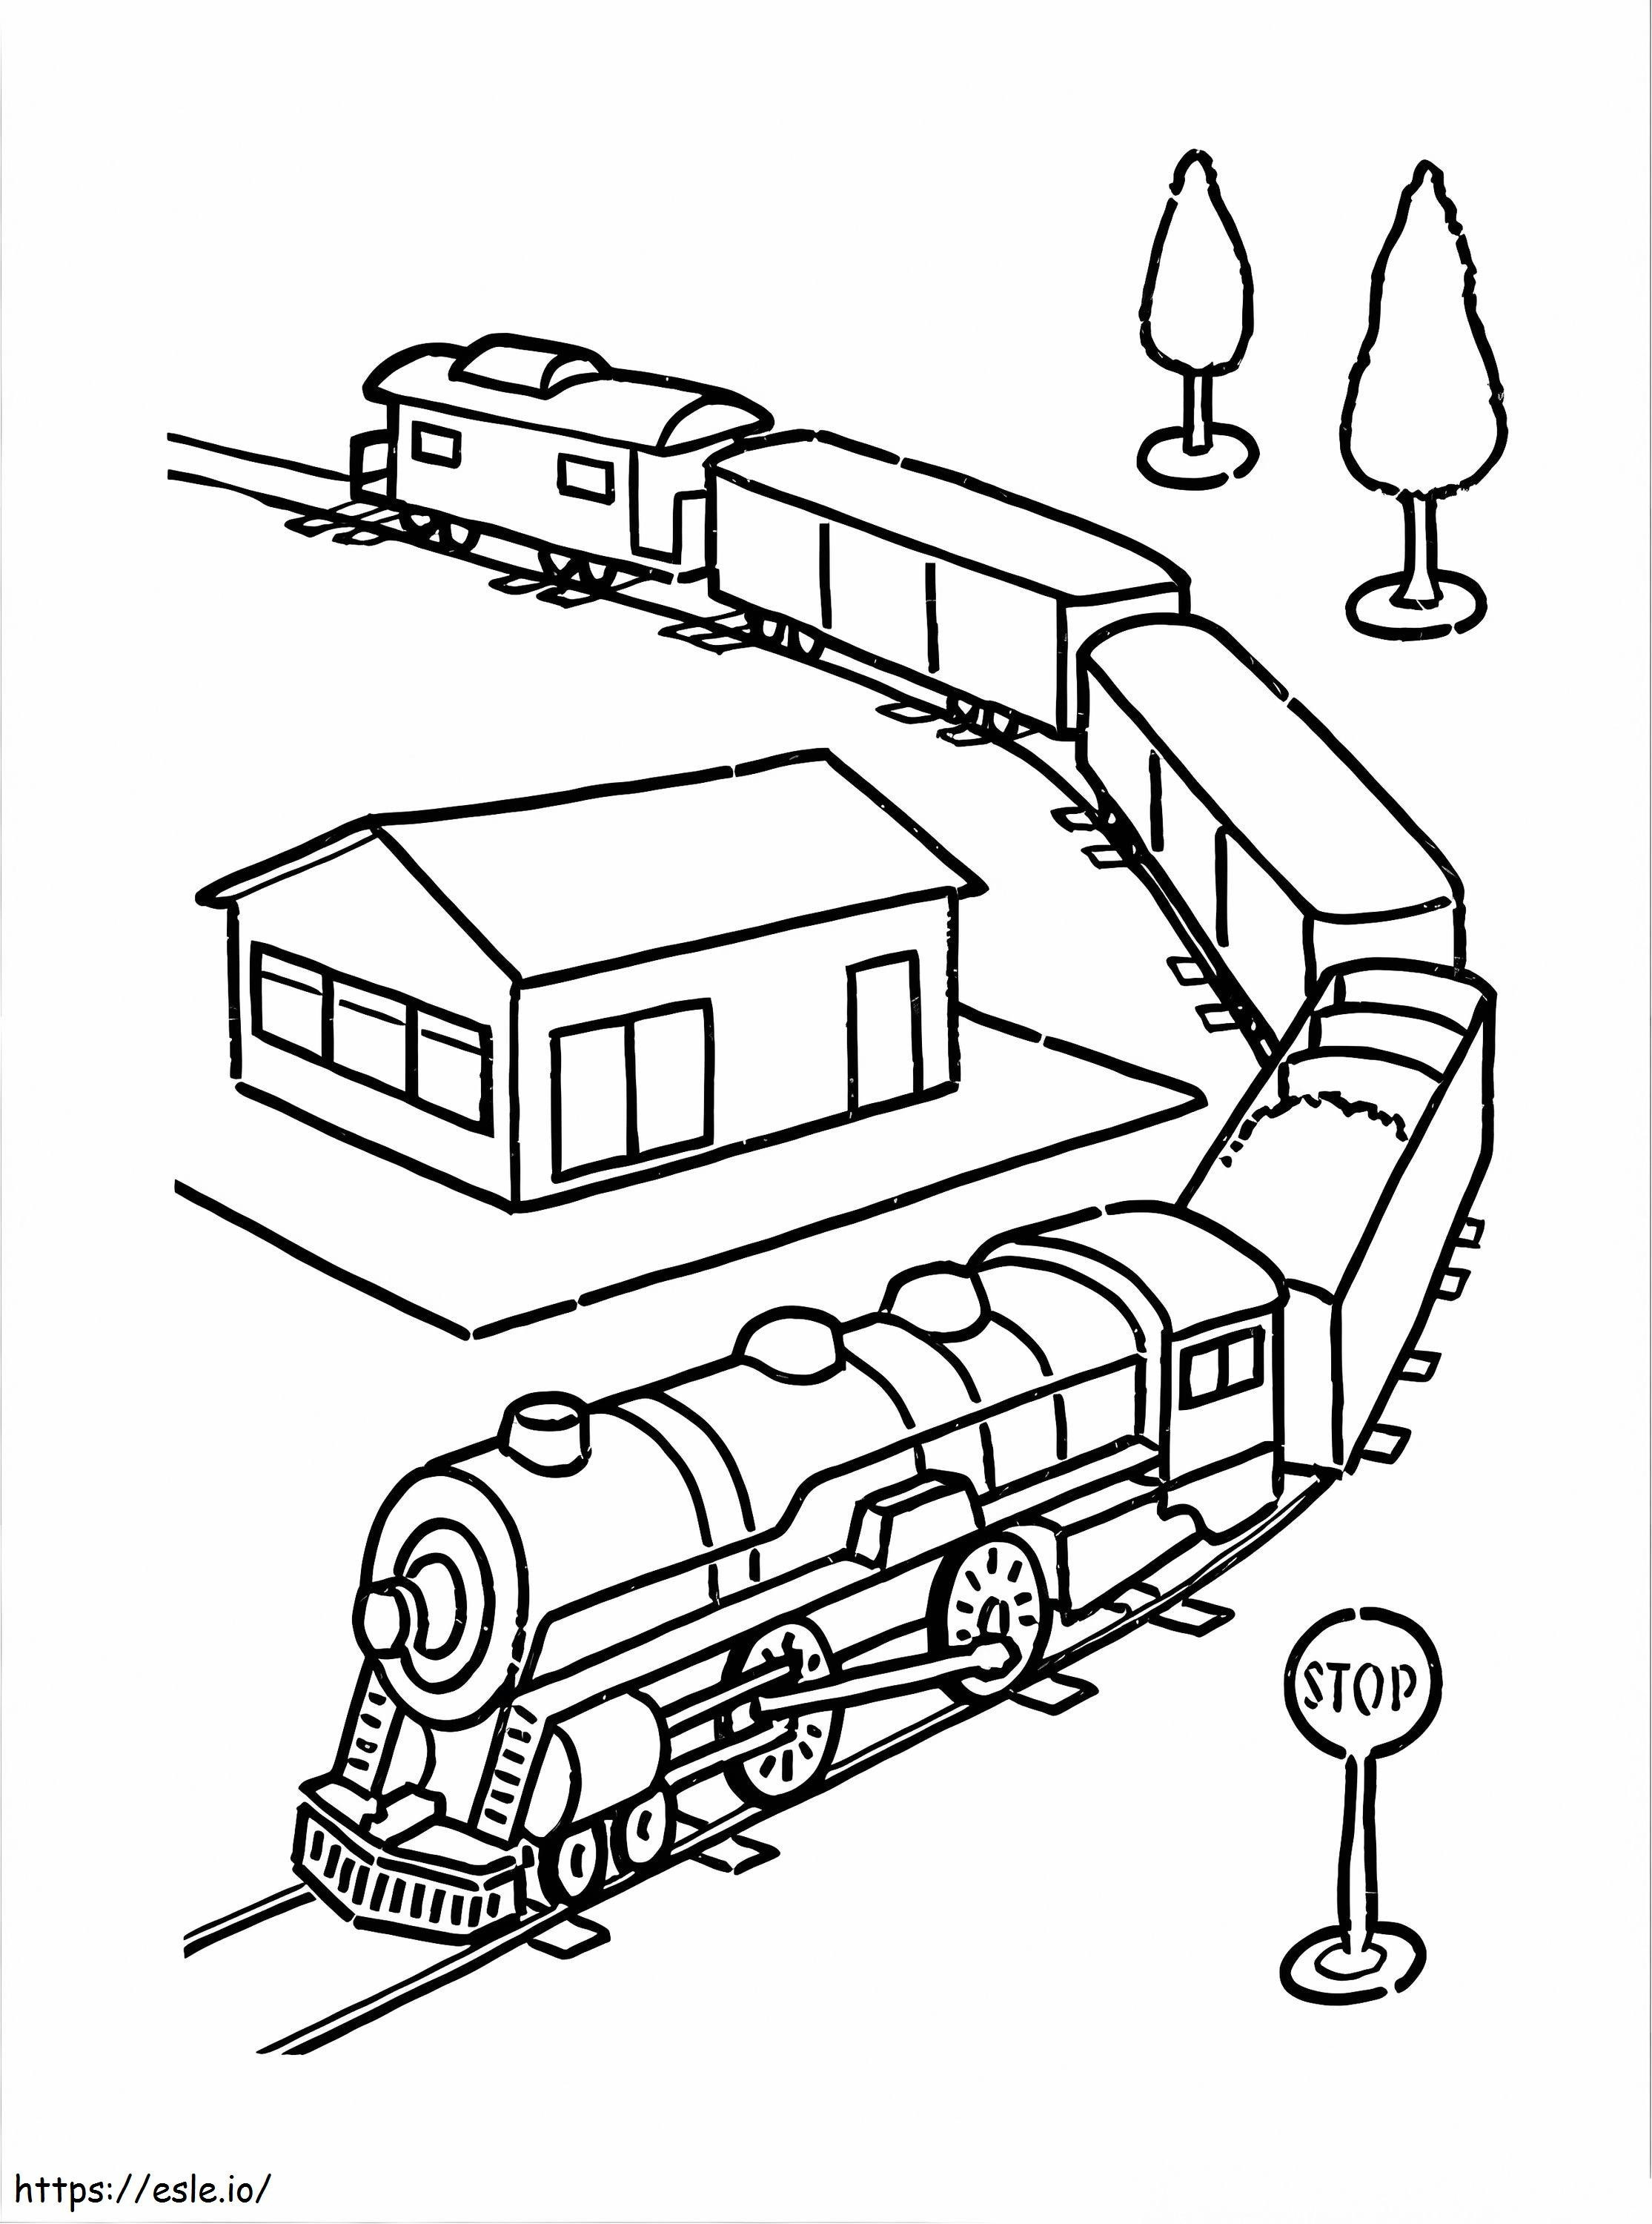 Train 1 coloring page